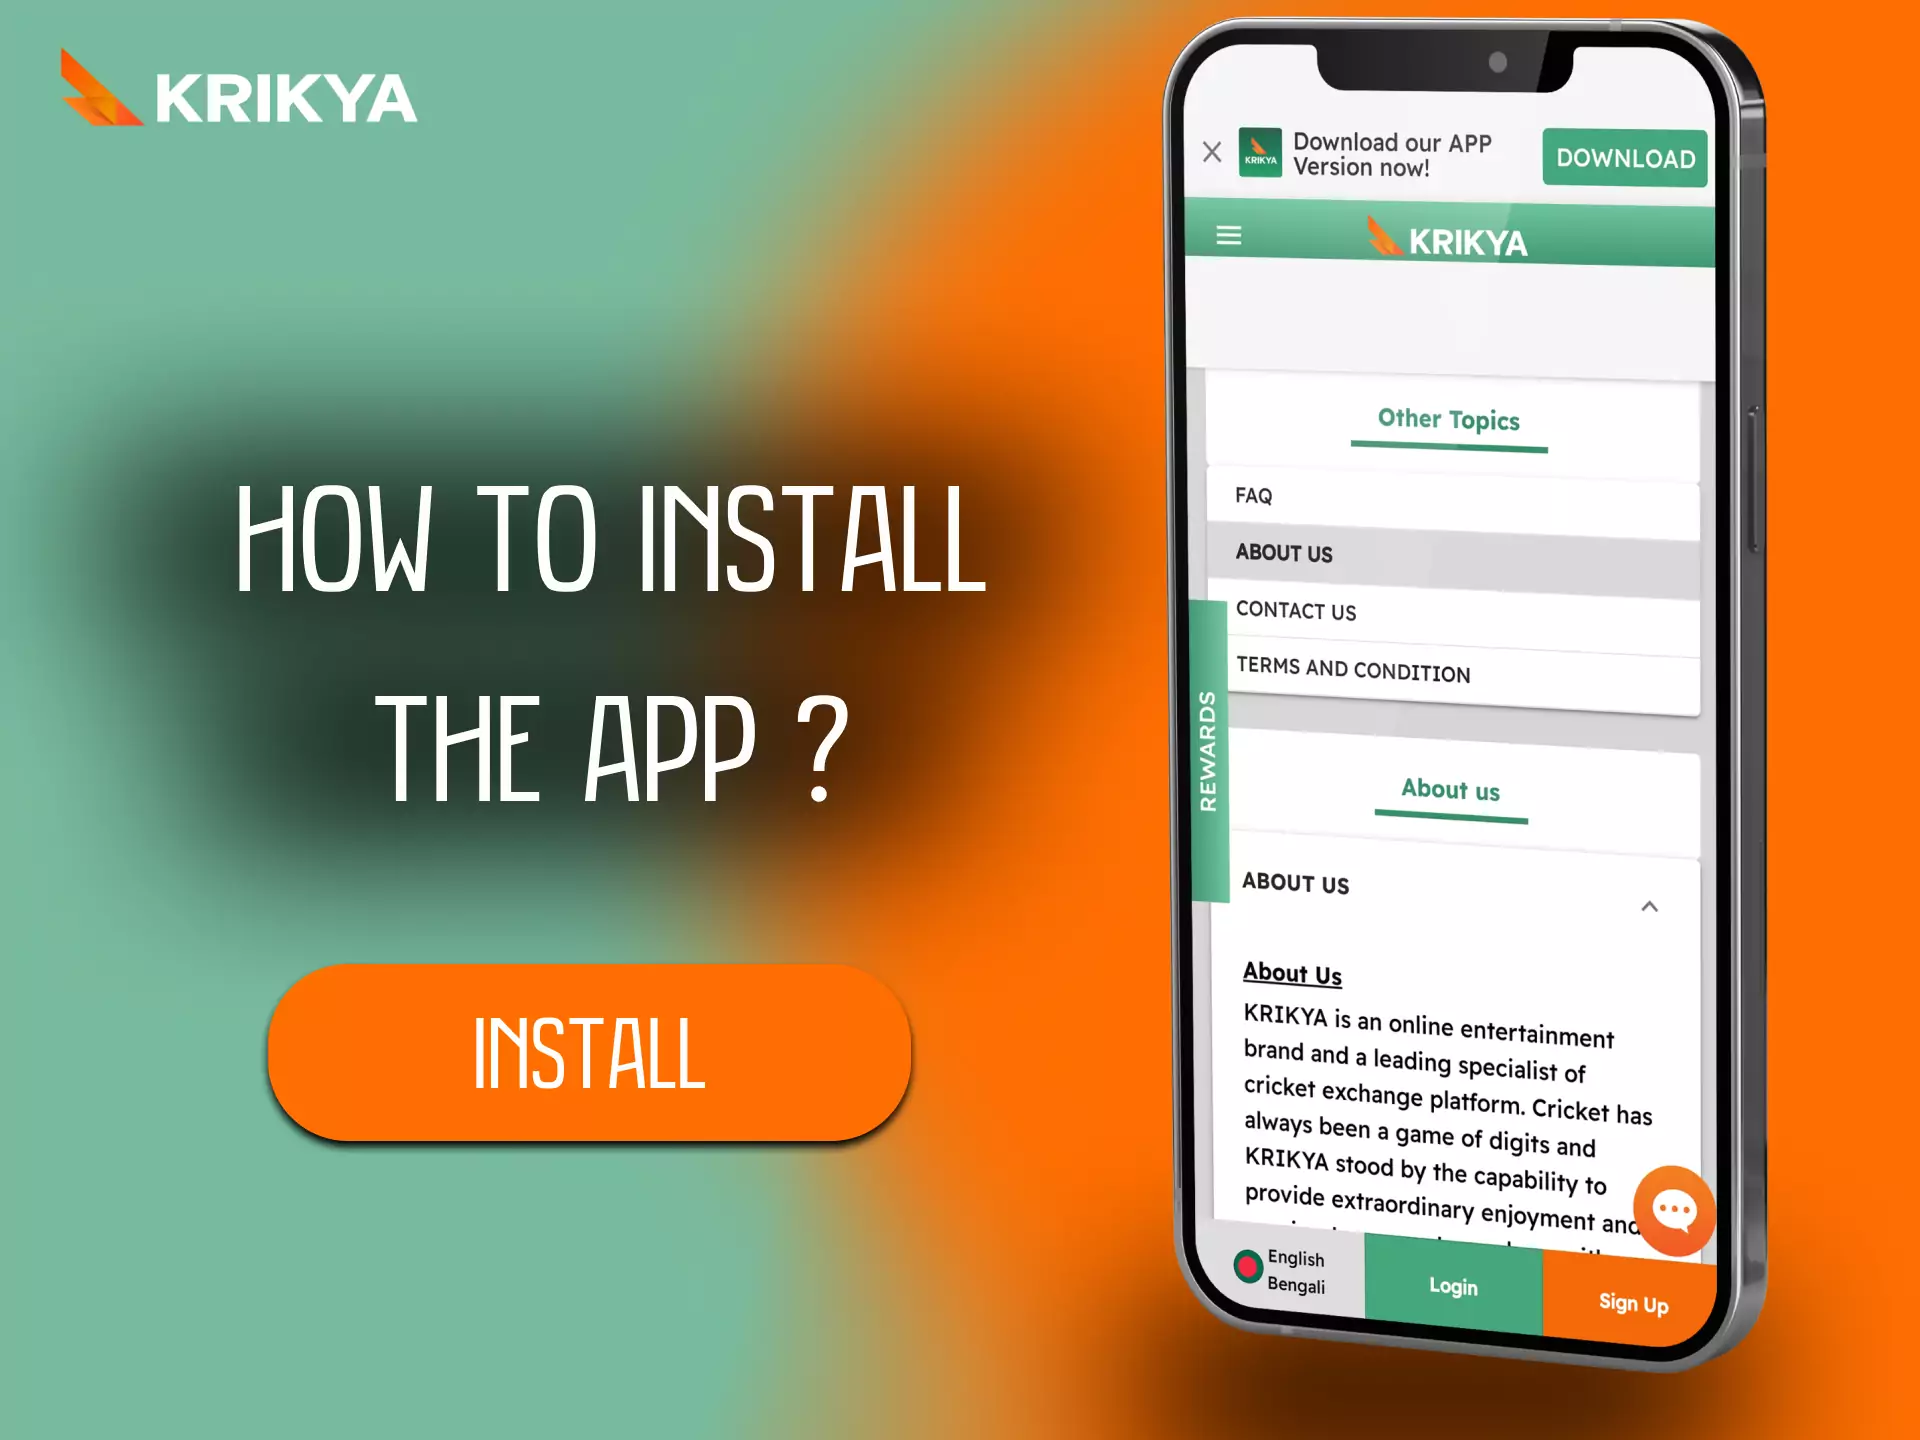 Read the instructions and install the Krikya app on your device.